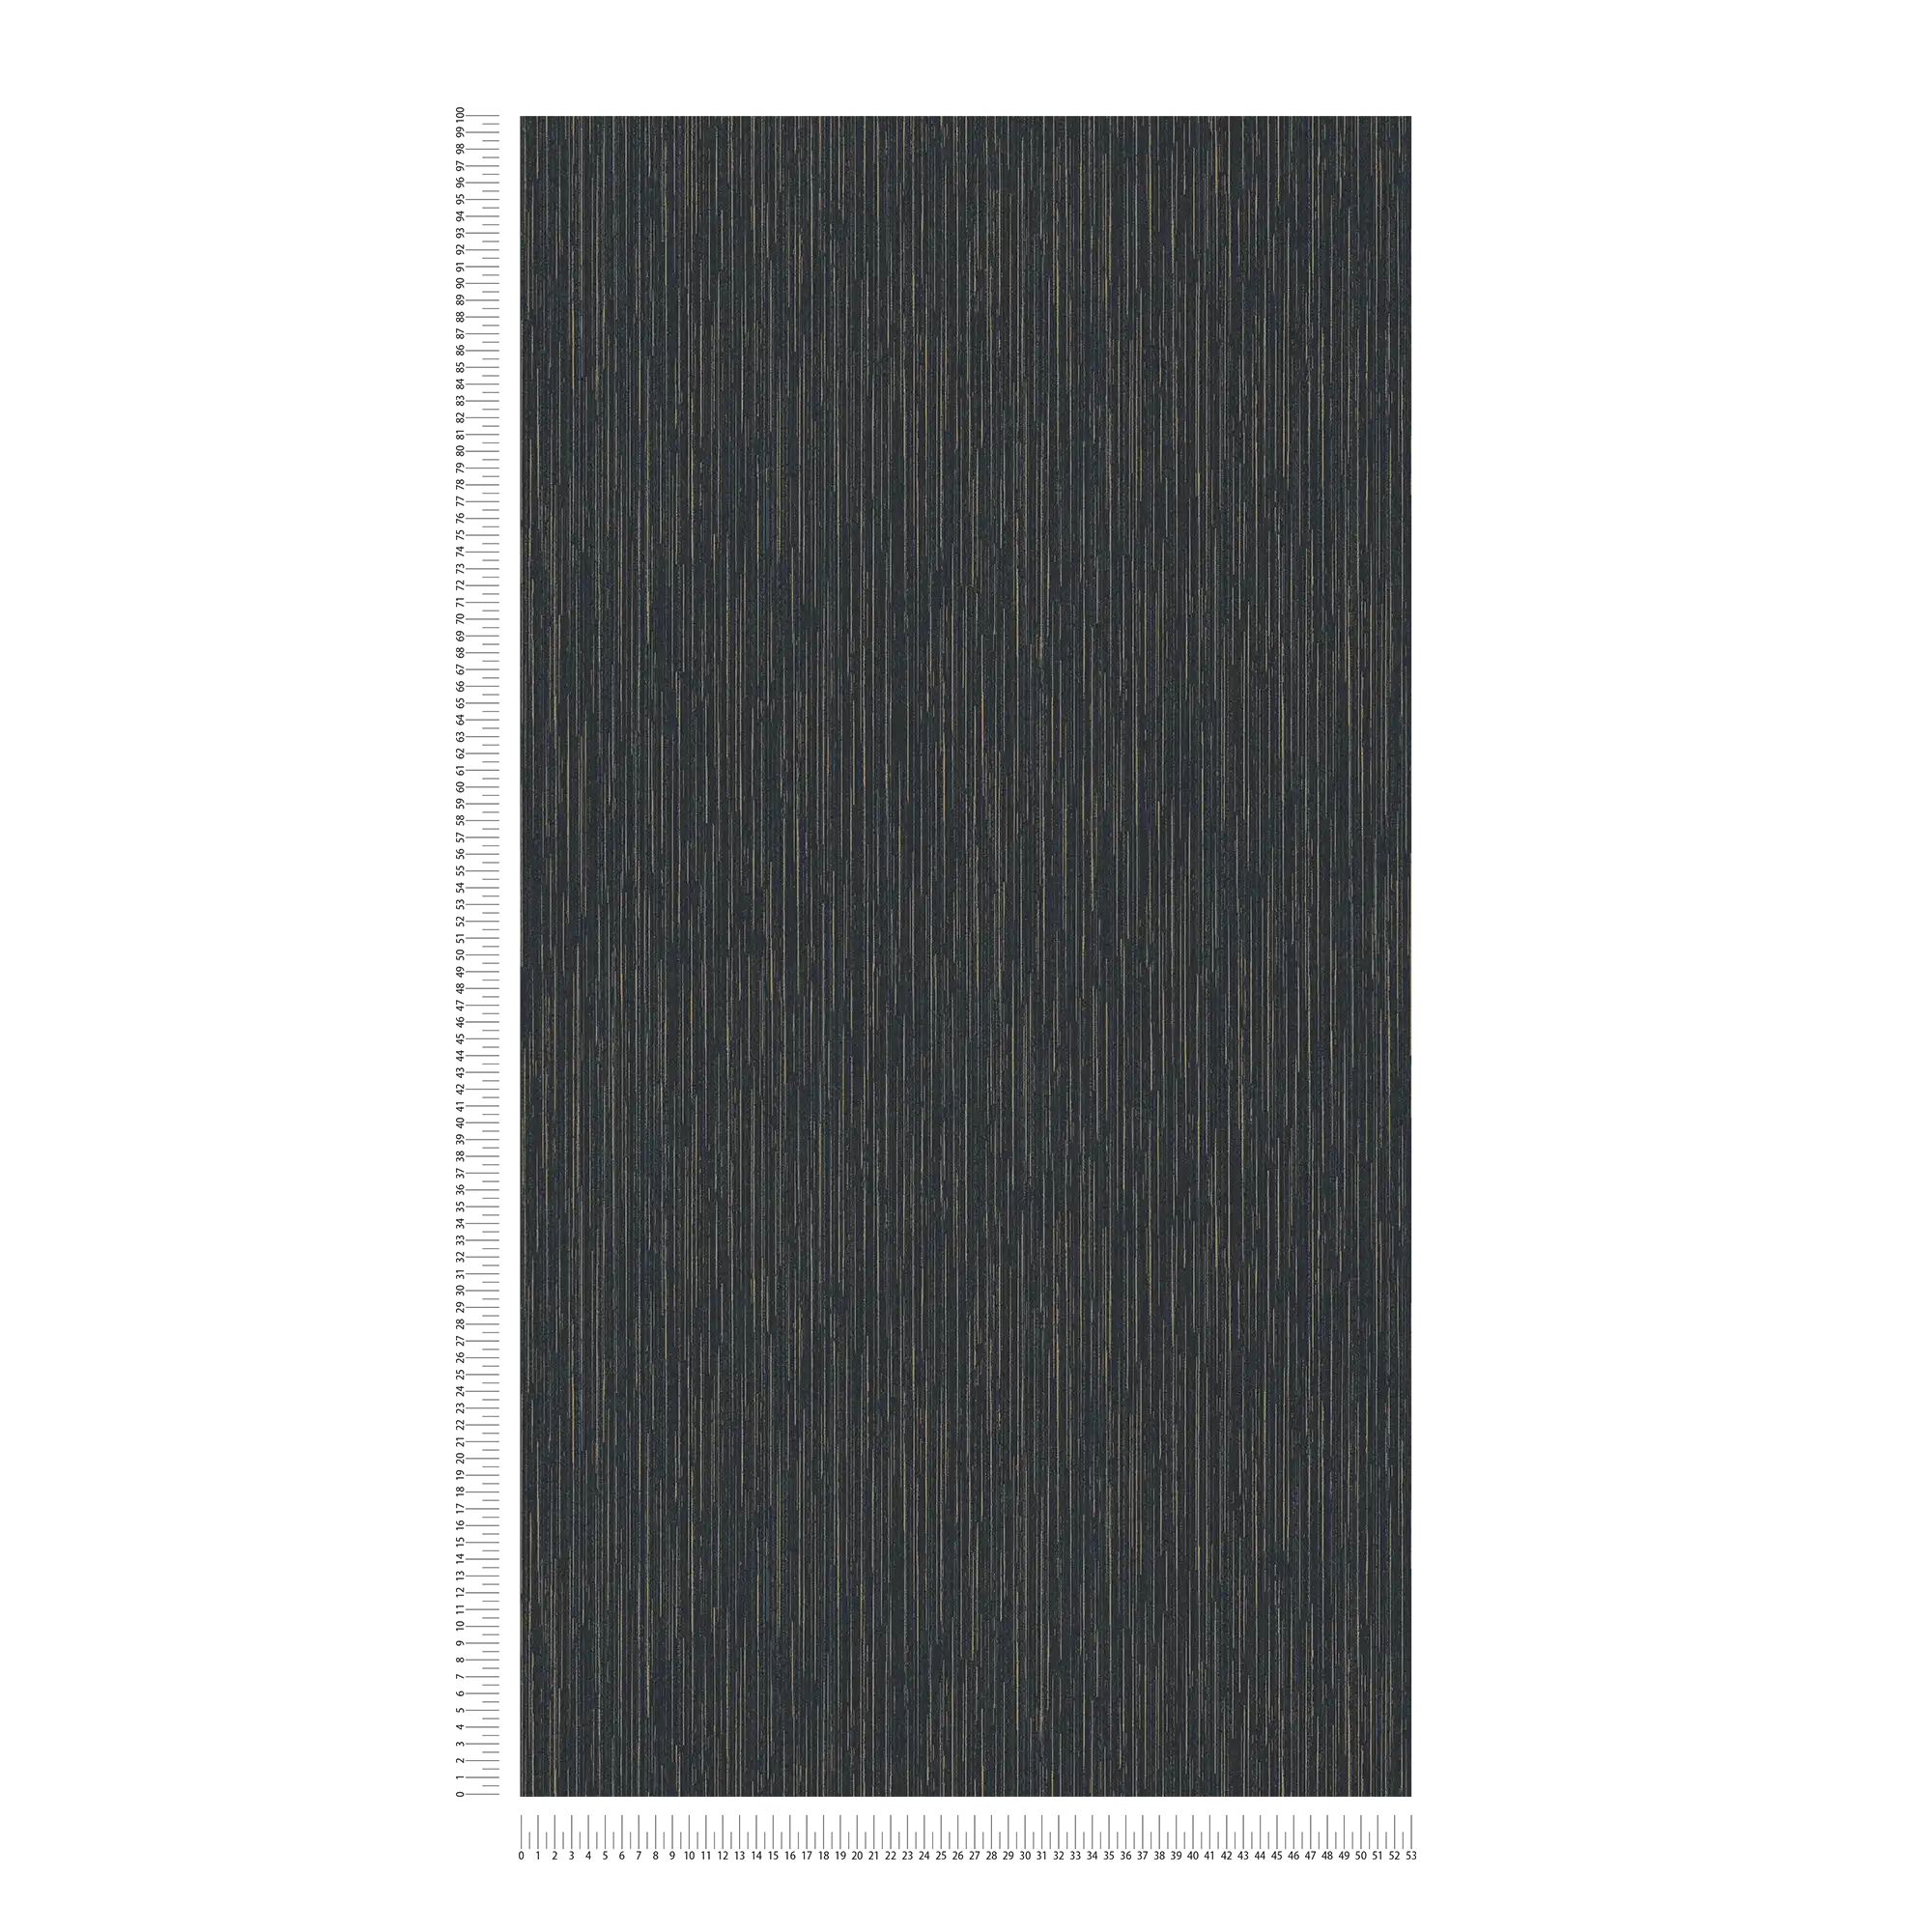             Black wallpaper with gold & silver line pattern - black, grey
        